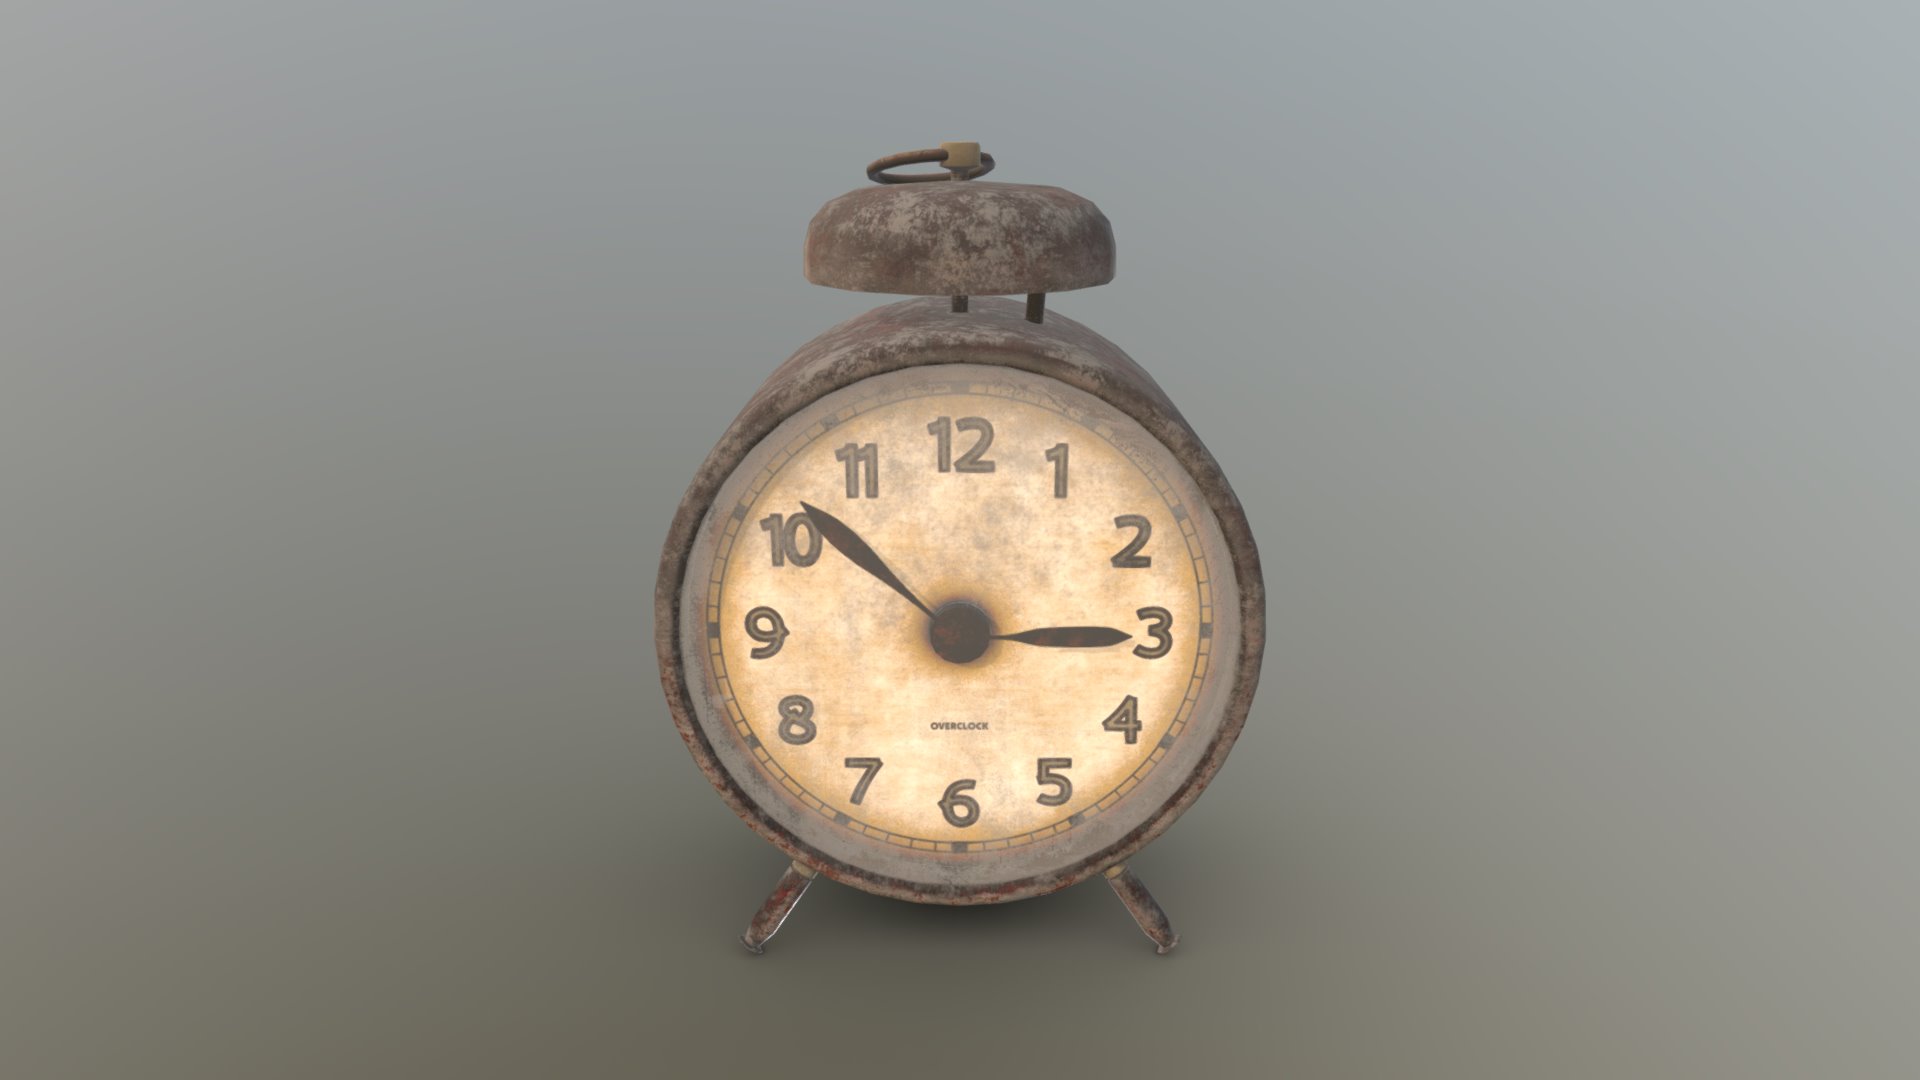 3D model Dirty desktop clock 3 of 20 - This is a 3D model of the Dirty desktop clock 3 of 20. The 3D model is about a silver analog watch.